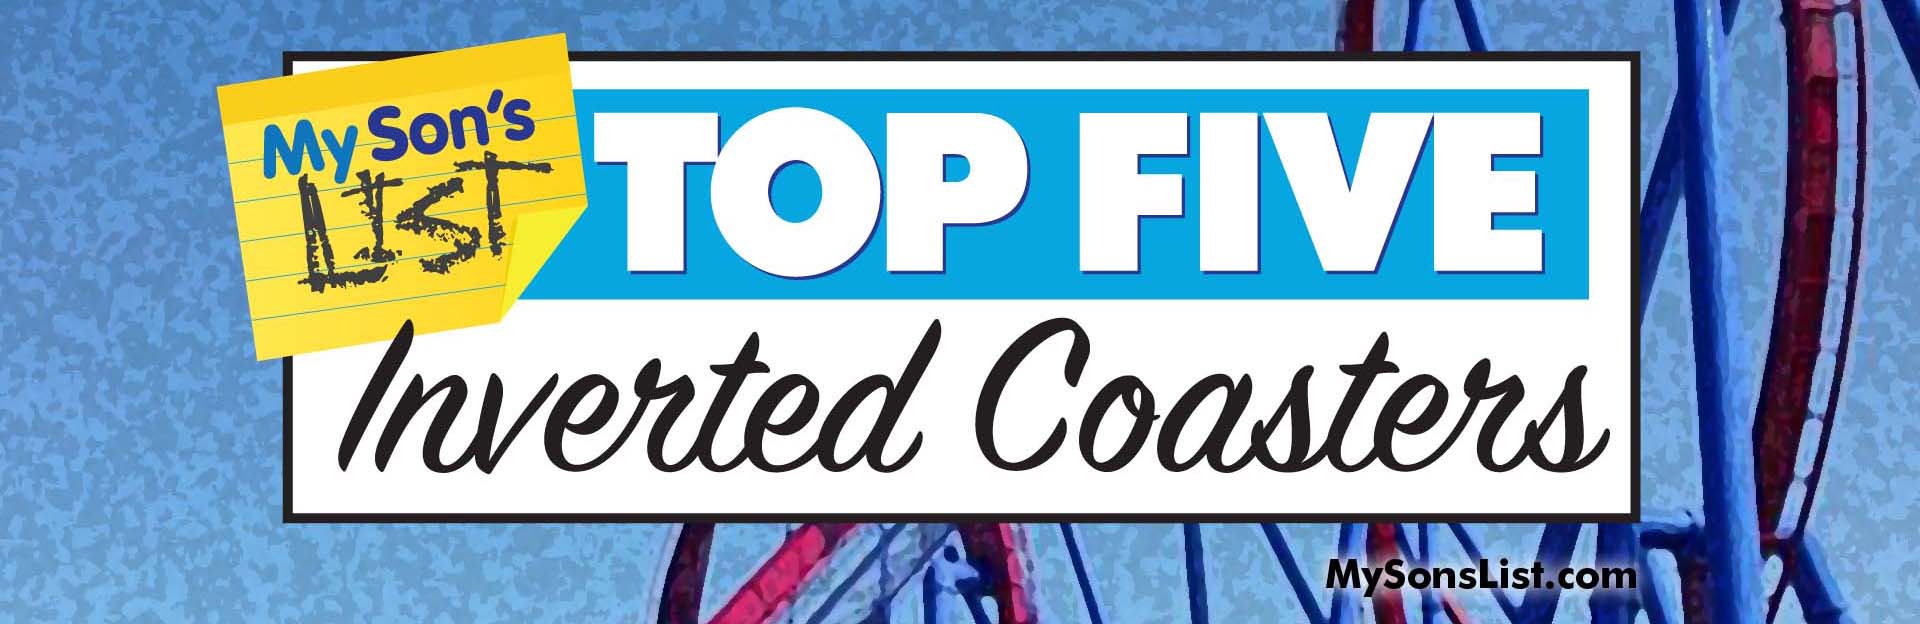 Top Five Inverted Coasters